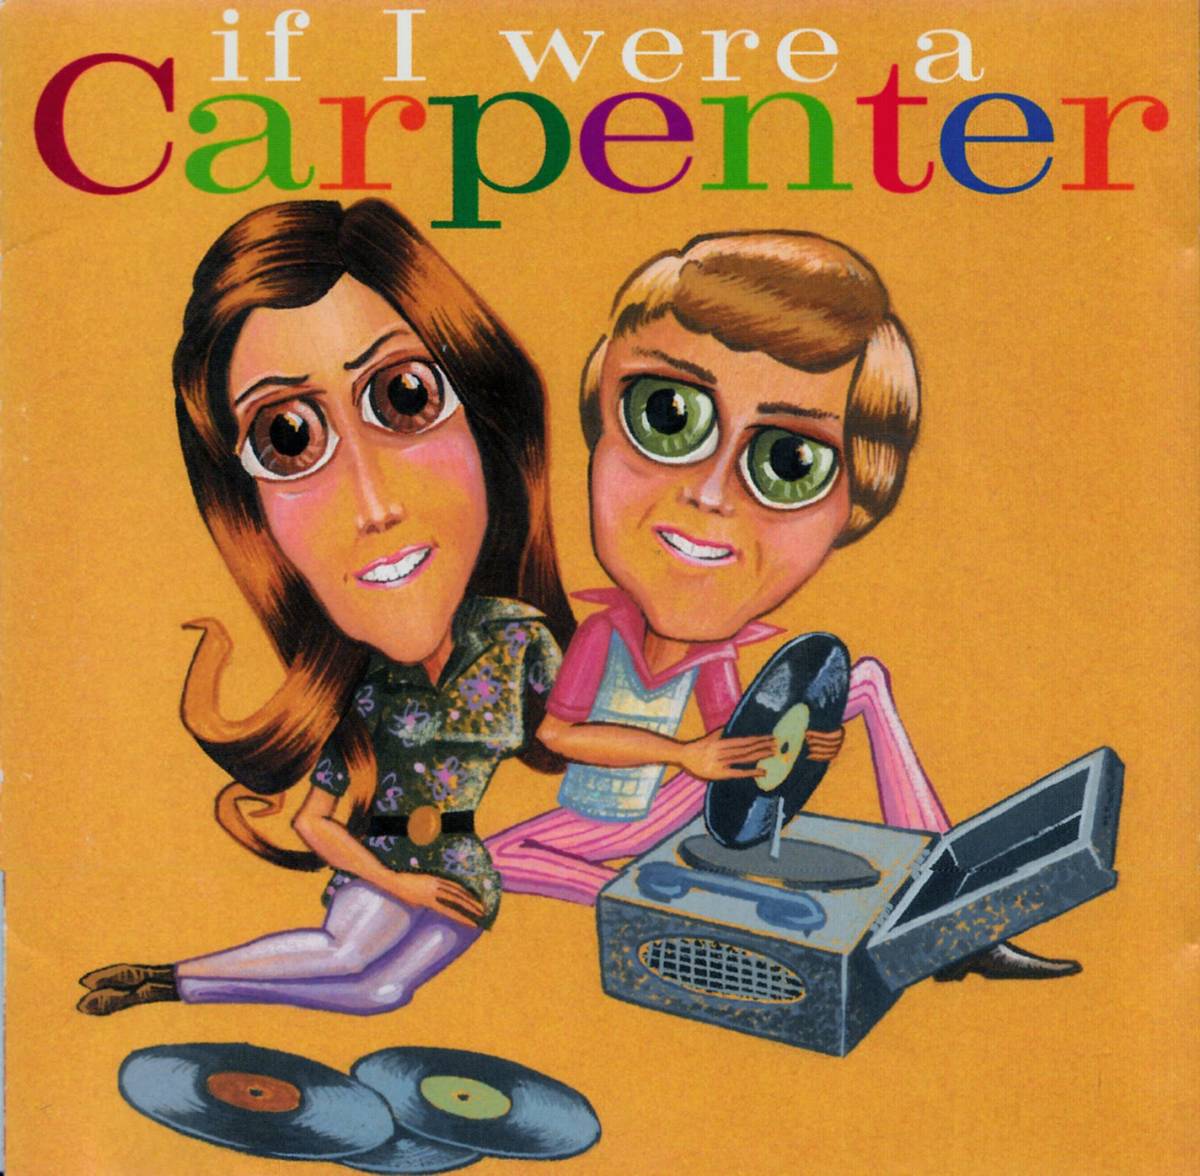 The album cover to 1994's If i Were A Carpenter shows cartoon versions of Karen and Richarad Carpenter sitting next to a record player, on an orange background.